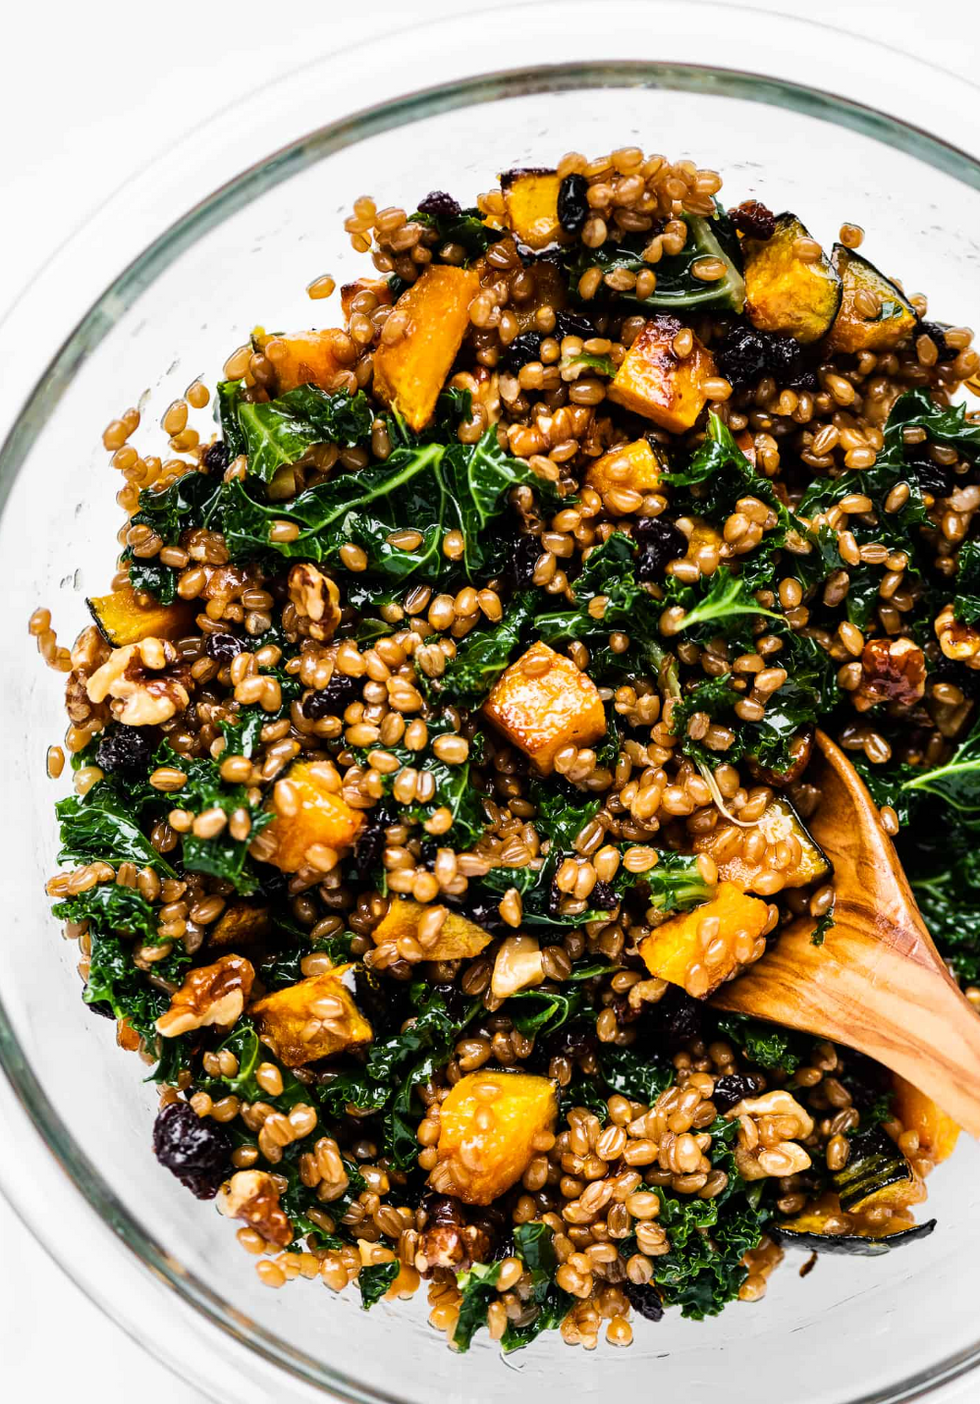 Wheat Berry Salad with Squash, Kale, Currants and Walnuts